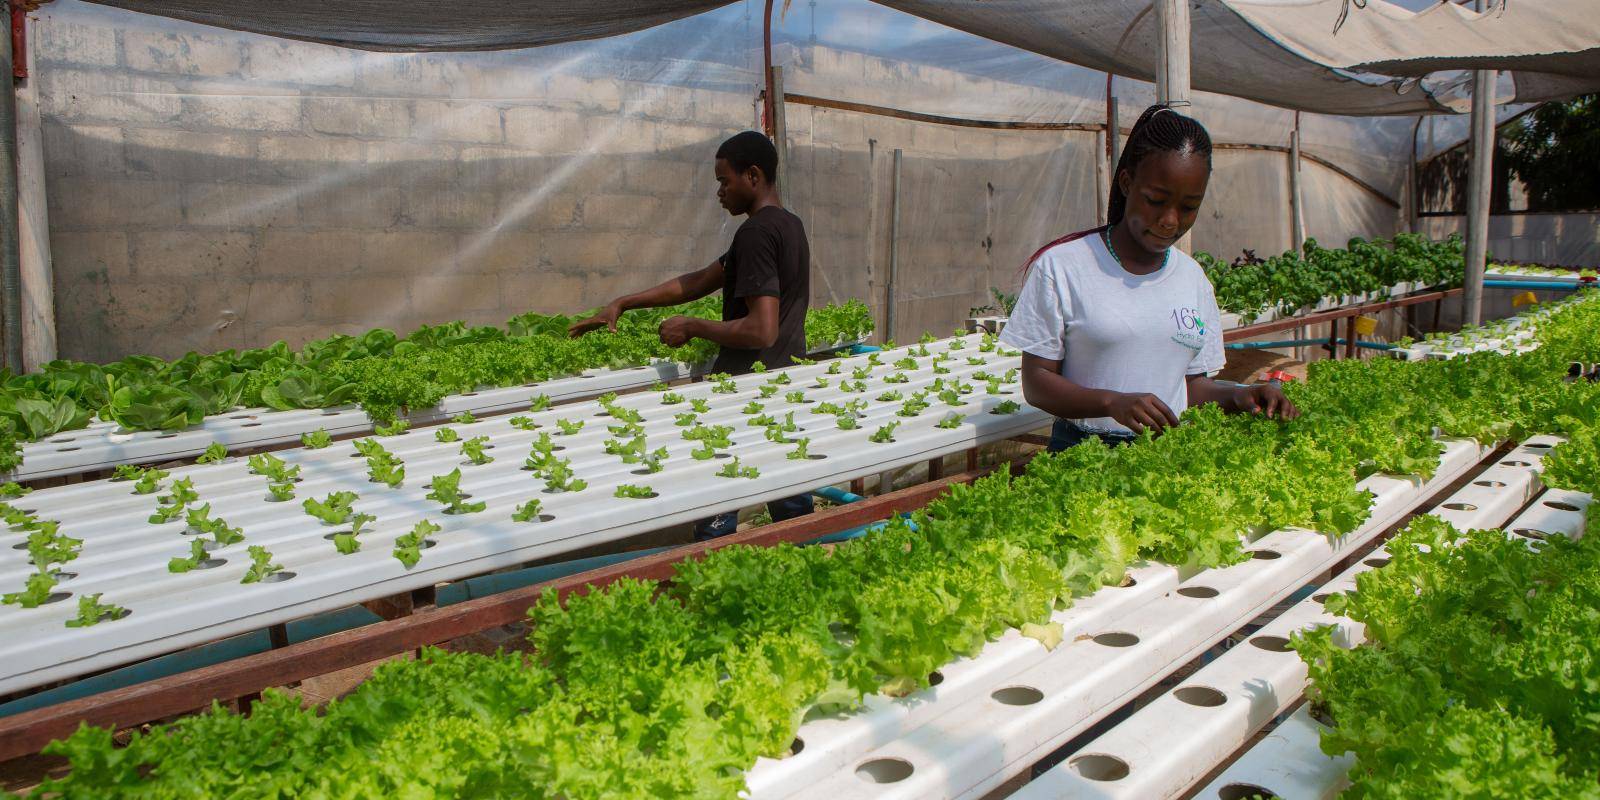 Photo shows workers harvesting green lettuce at a hydroponics farm in Harare, Zimbabwe